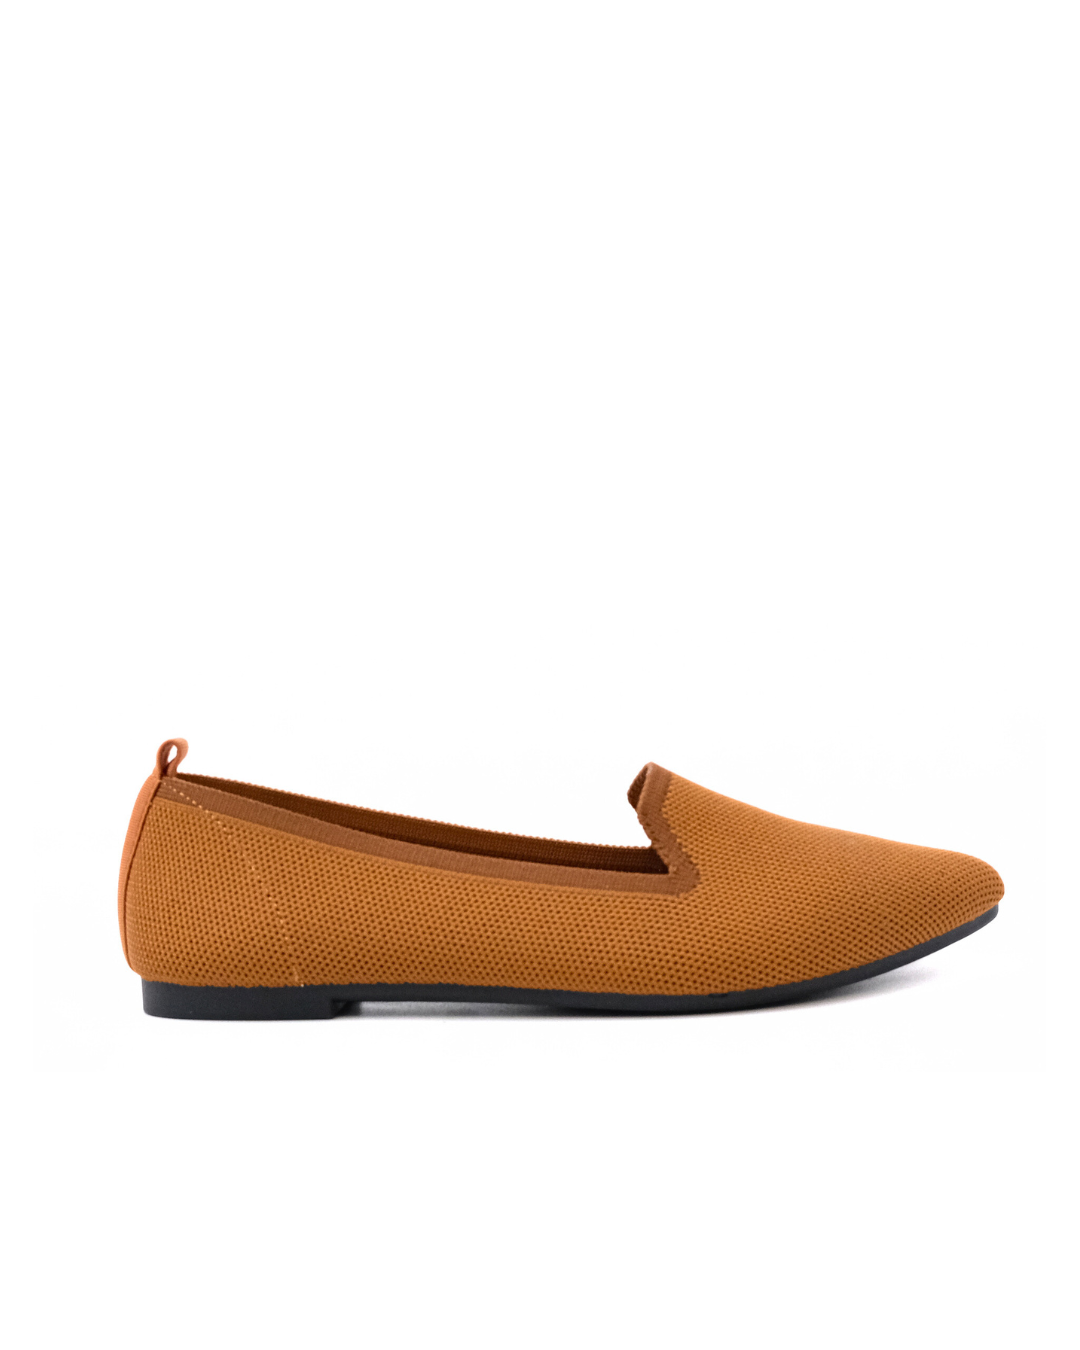 【NEW】Lyden Mila Series Flats - Coffee